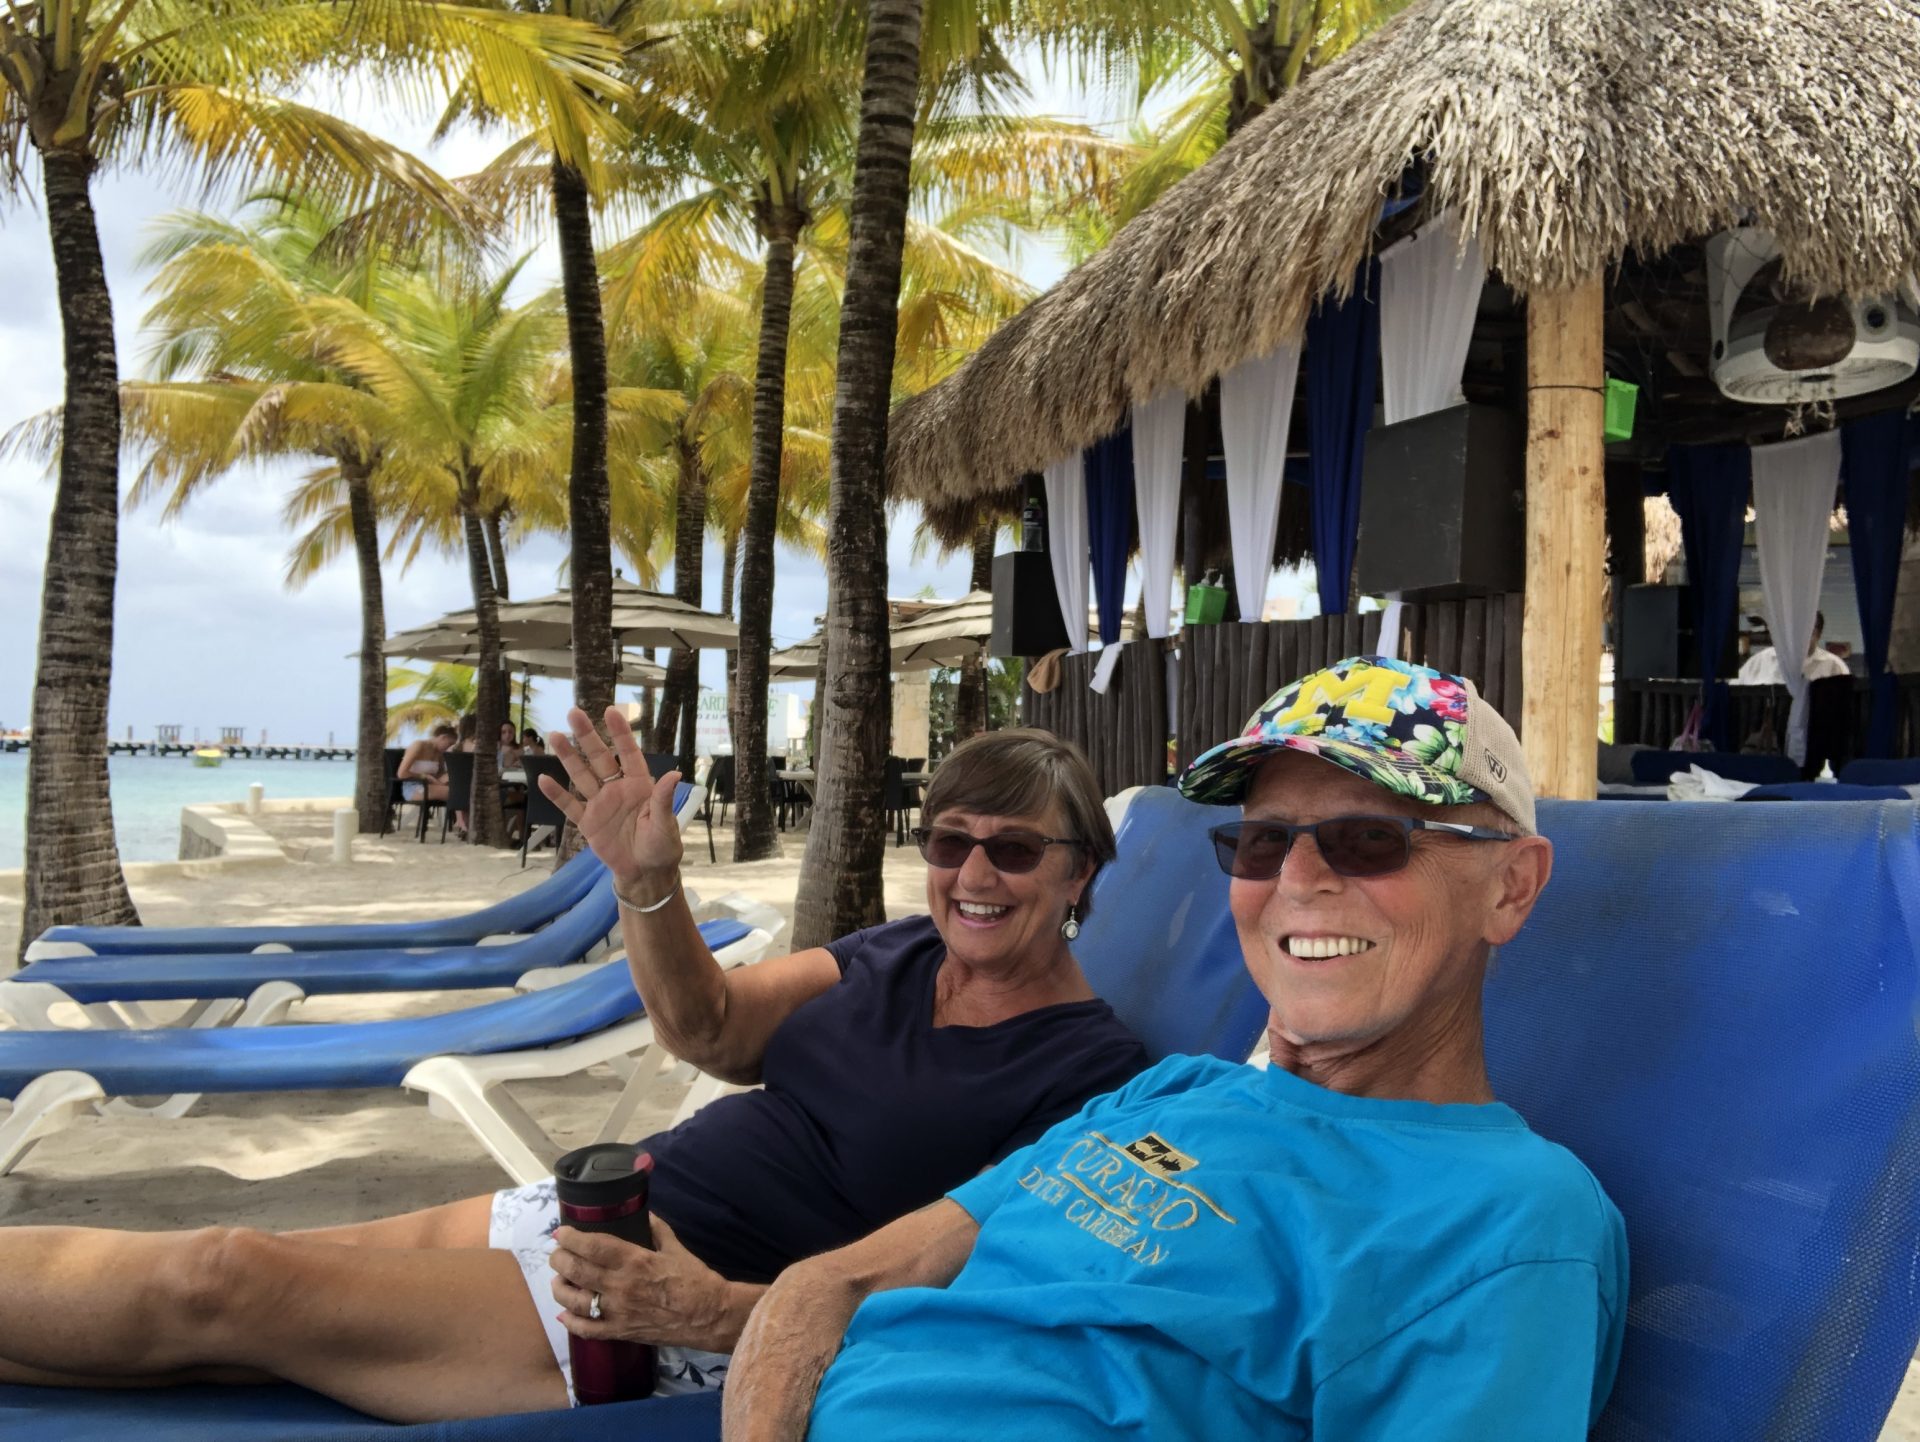 This is how I hope everyone remembers Larry.  We enjoyed our time together so much!  He loved cruising and you could find us any place in the Caribbean at any times!